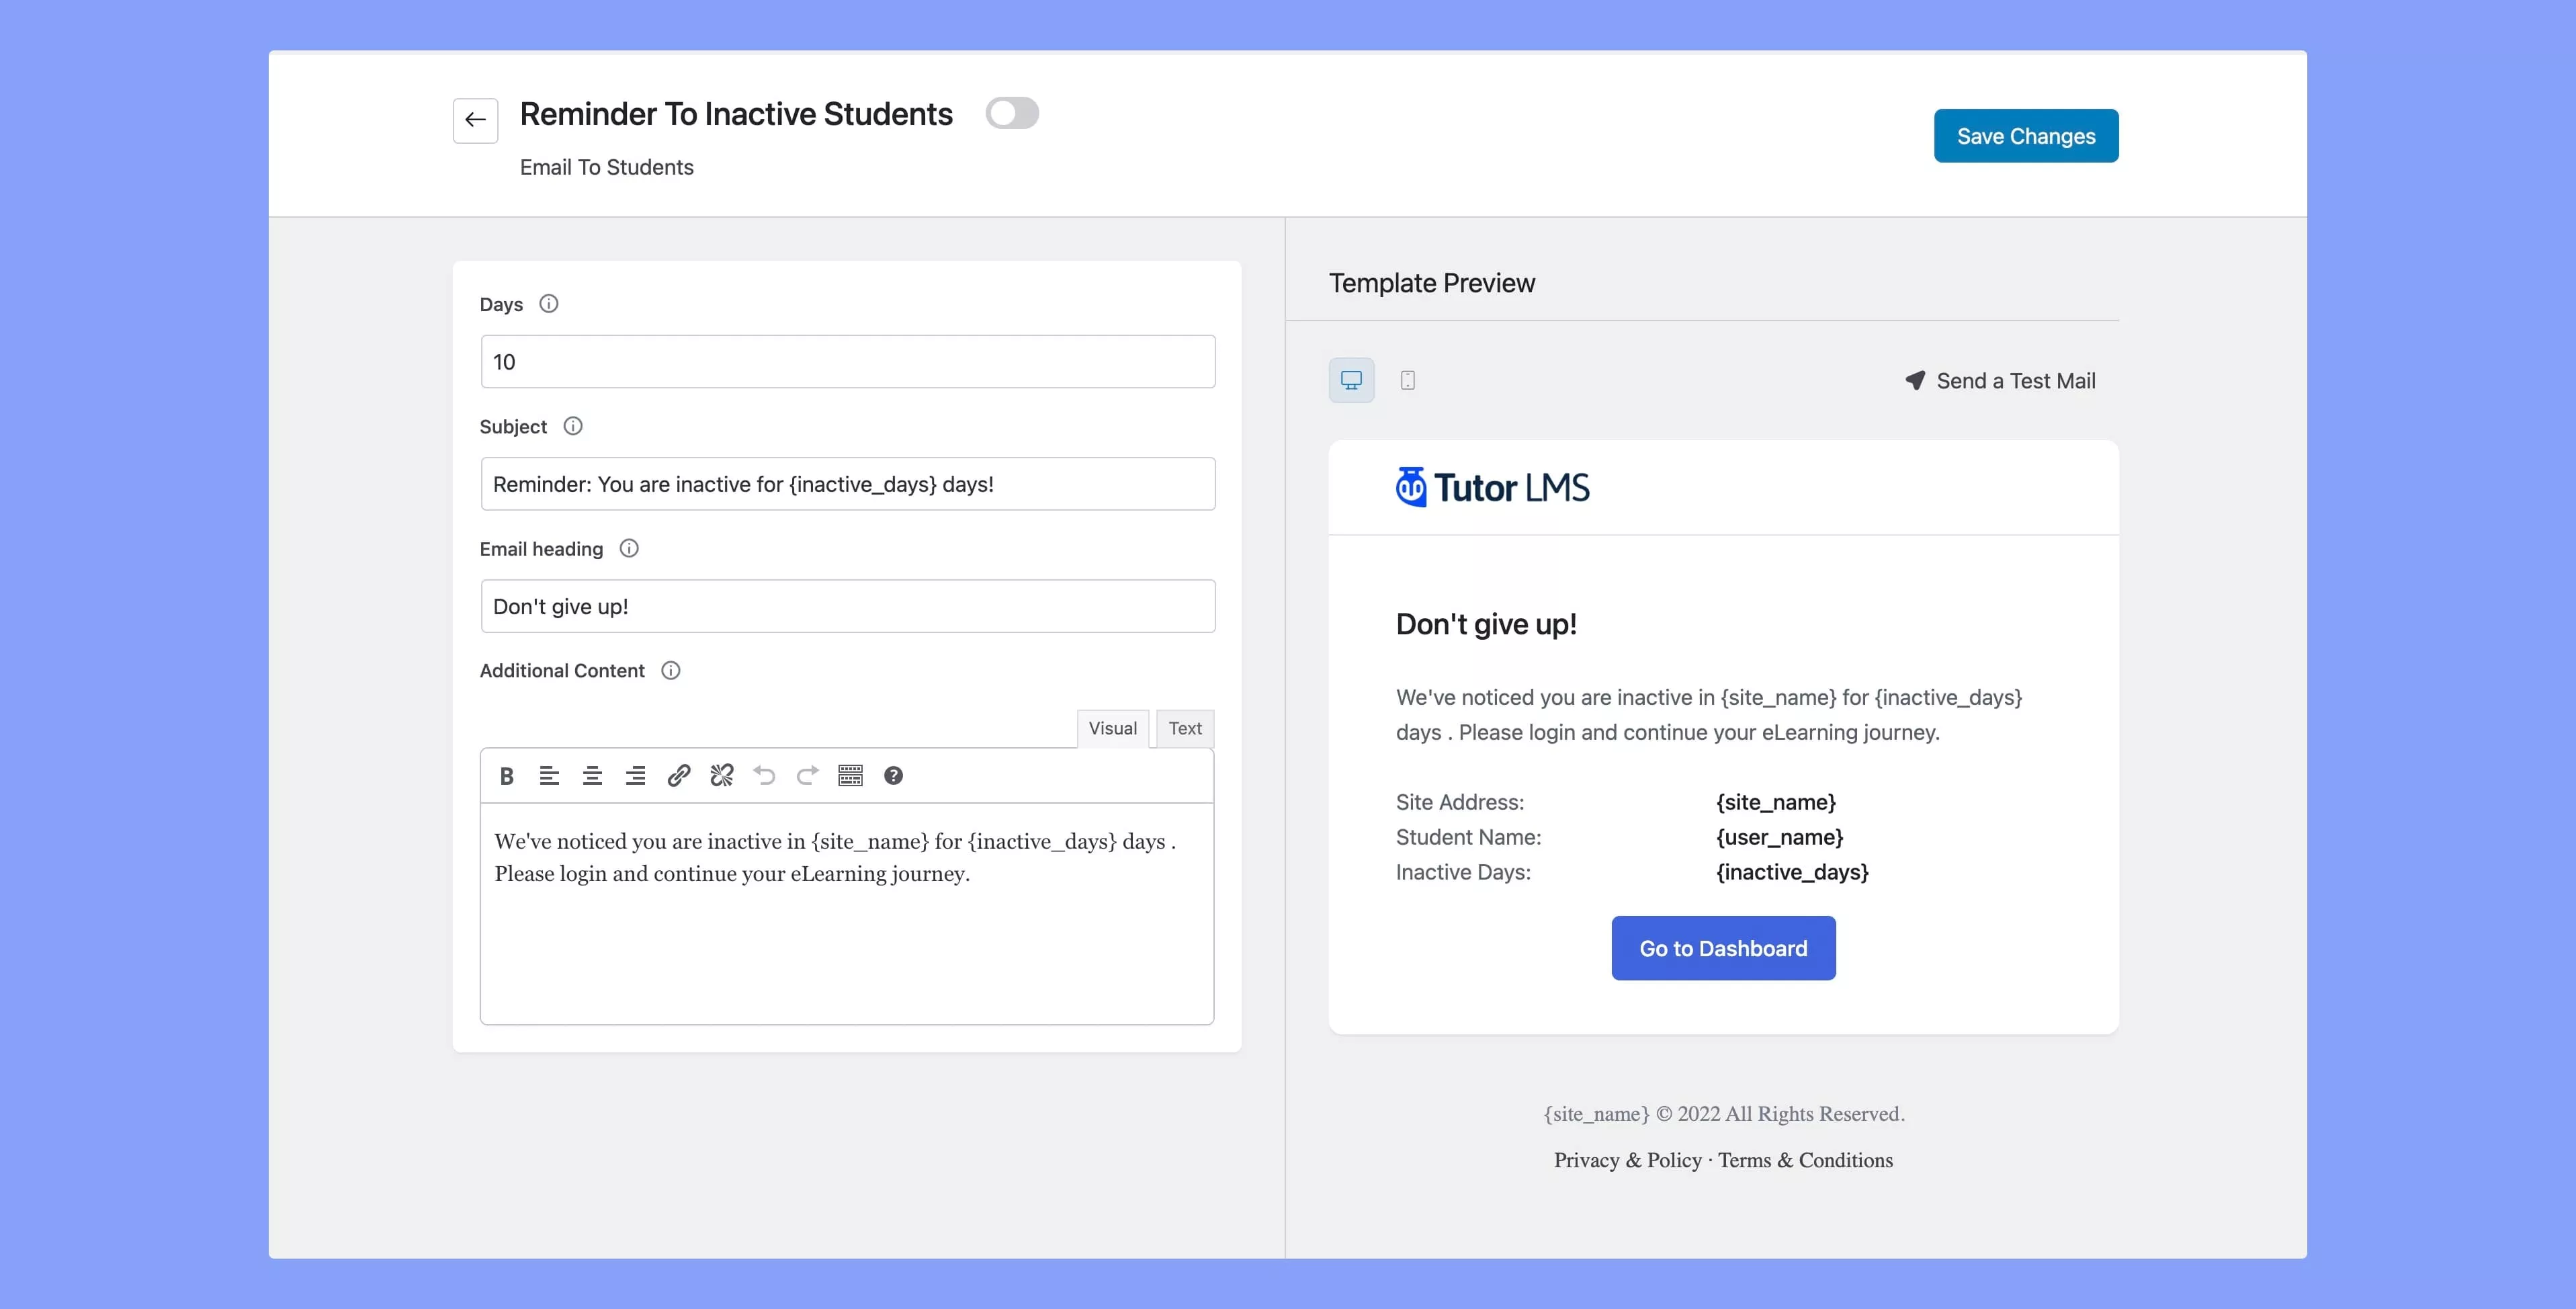 Tutor LMS 2.5.0 email template